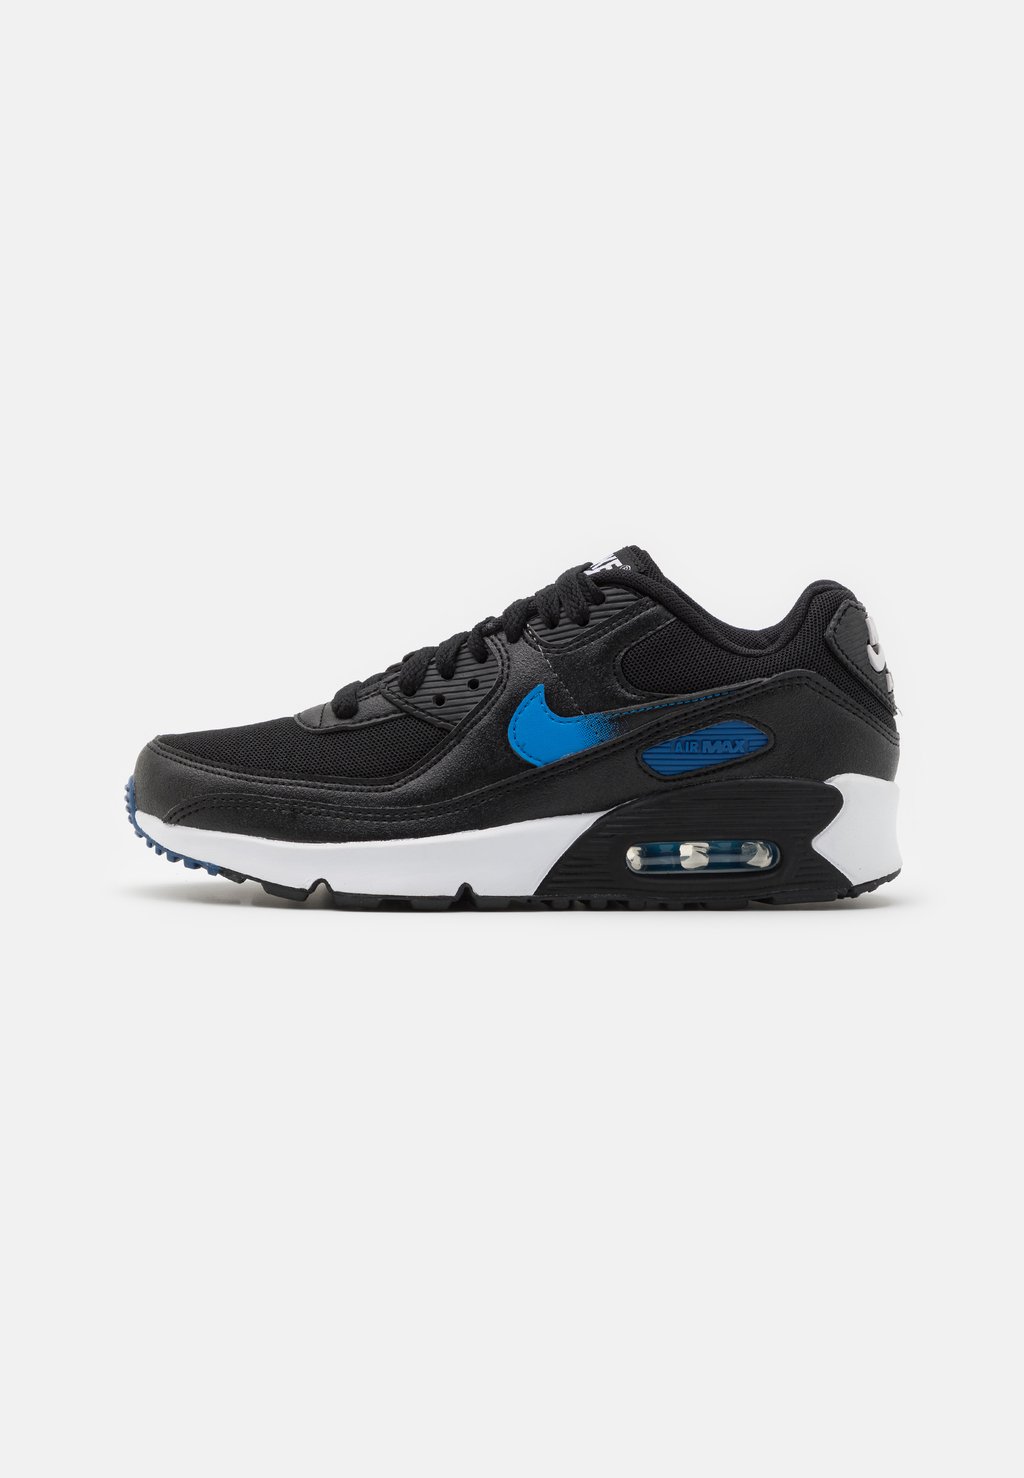 Низкие кроссовки Air Max 90 Unisex Nike, цвет black/photo blue/court blue/white laeacco old town basket court playground park sport match party blue sky scenic photo background photographic backdrop photocall